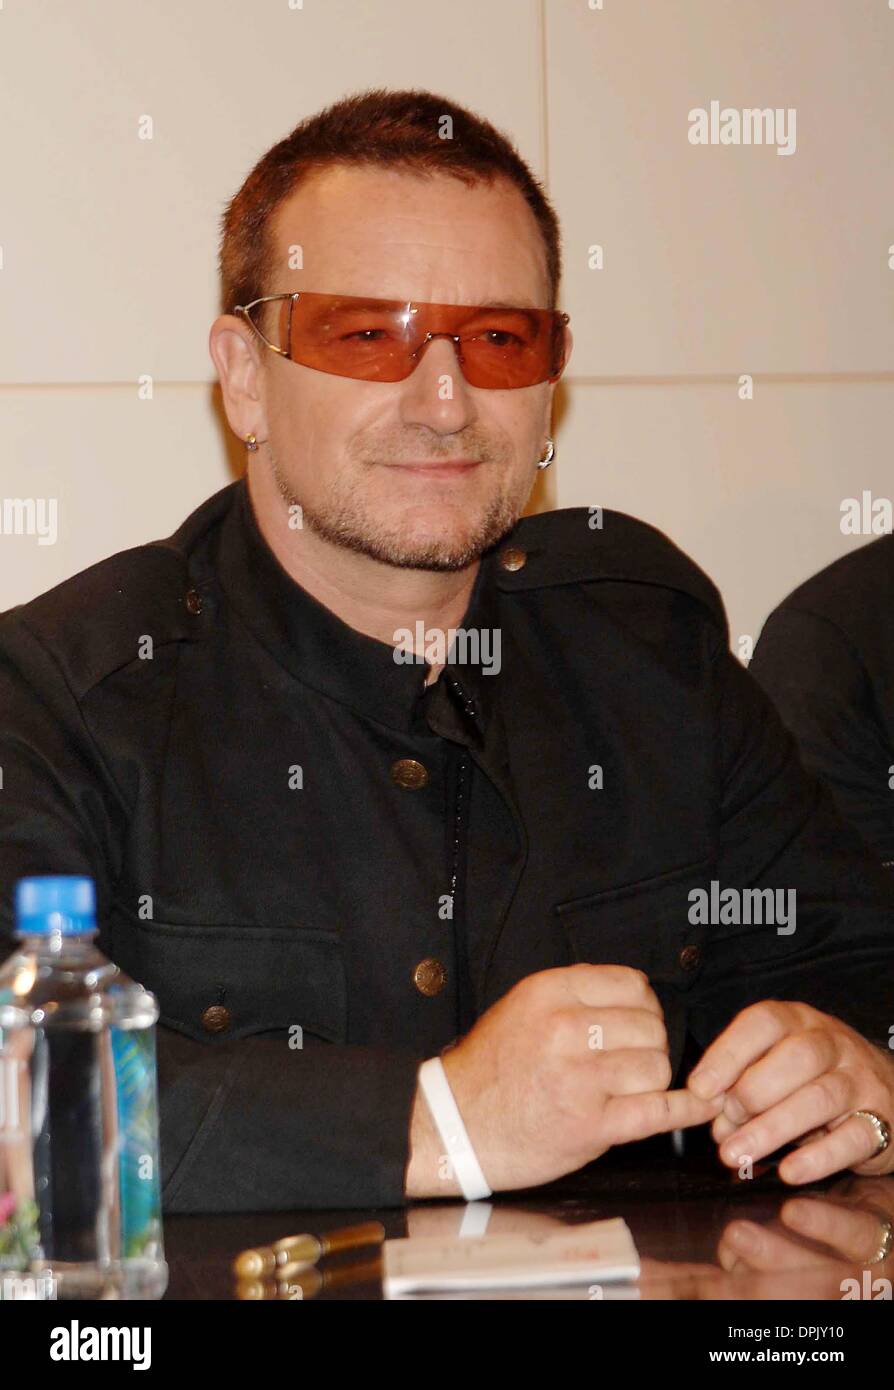 Sept. 26, 2006 - New York, New York, USA - The band U2 appears at the Barnes & Noble book store in Union Square in Manhattan  to promote their new book on U2 on September 26, 2006.. Andrea Renault     K49998AR.BONO(Credit Image: © Globe Photos/ZUMAPRESS.com) Stock Photo